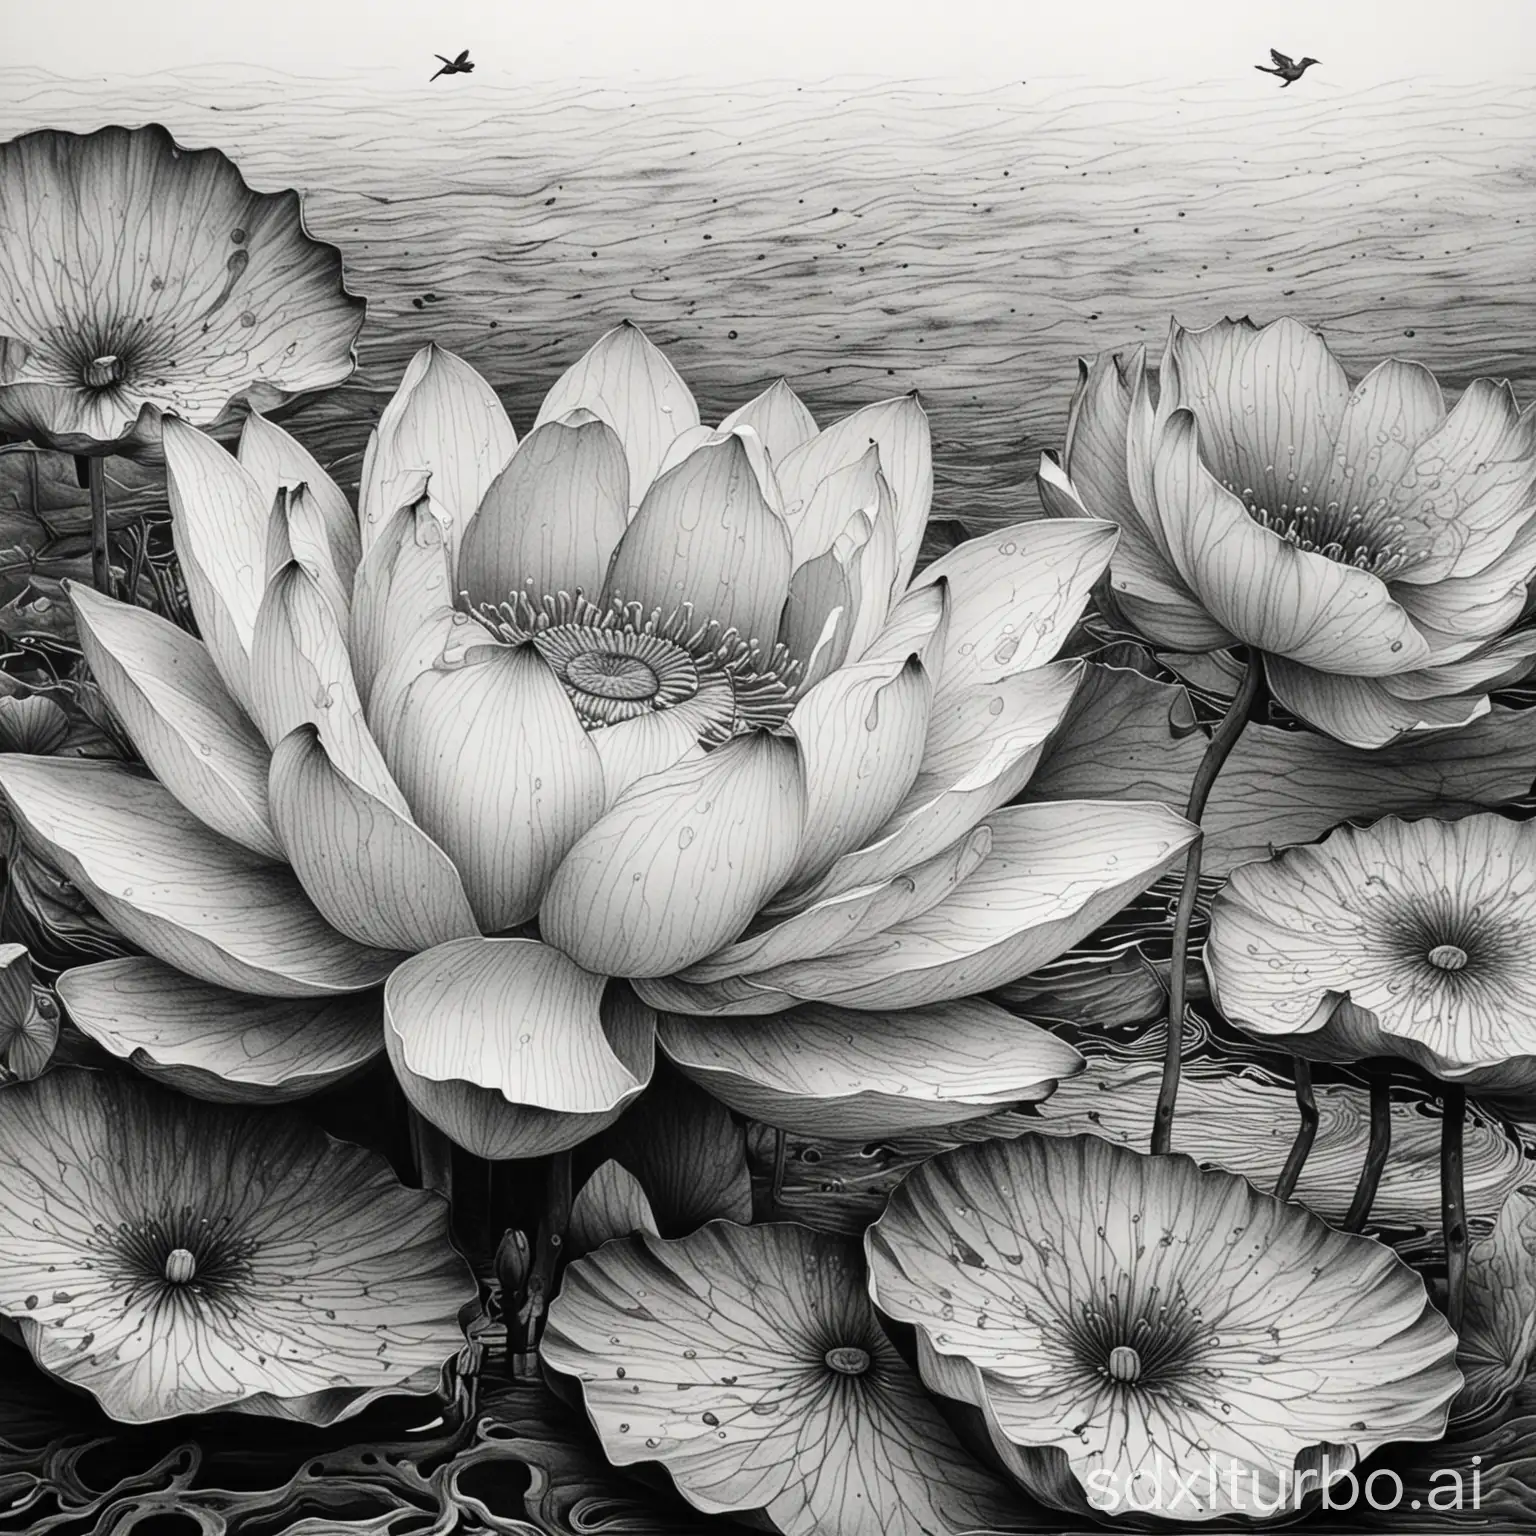 Lotus-Flower-and-Birds-Eye-View-in-Simplistic-Black-and-White-Pen-Drawings